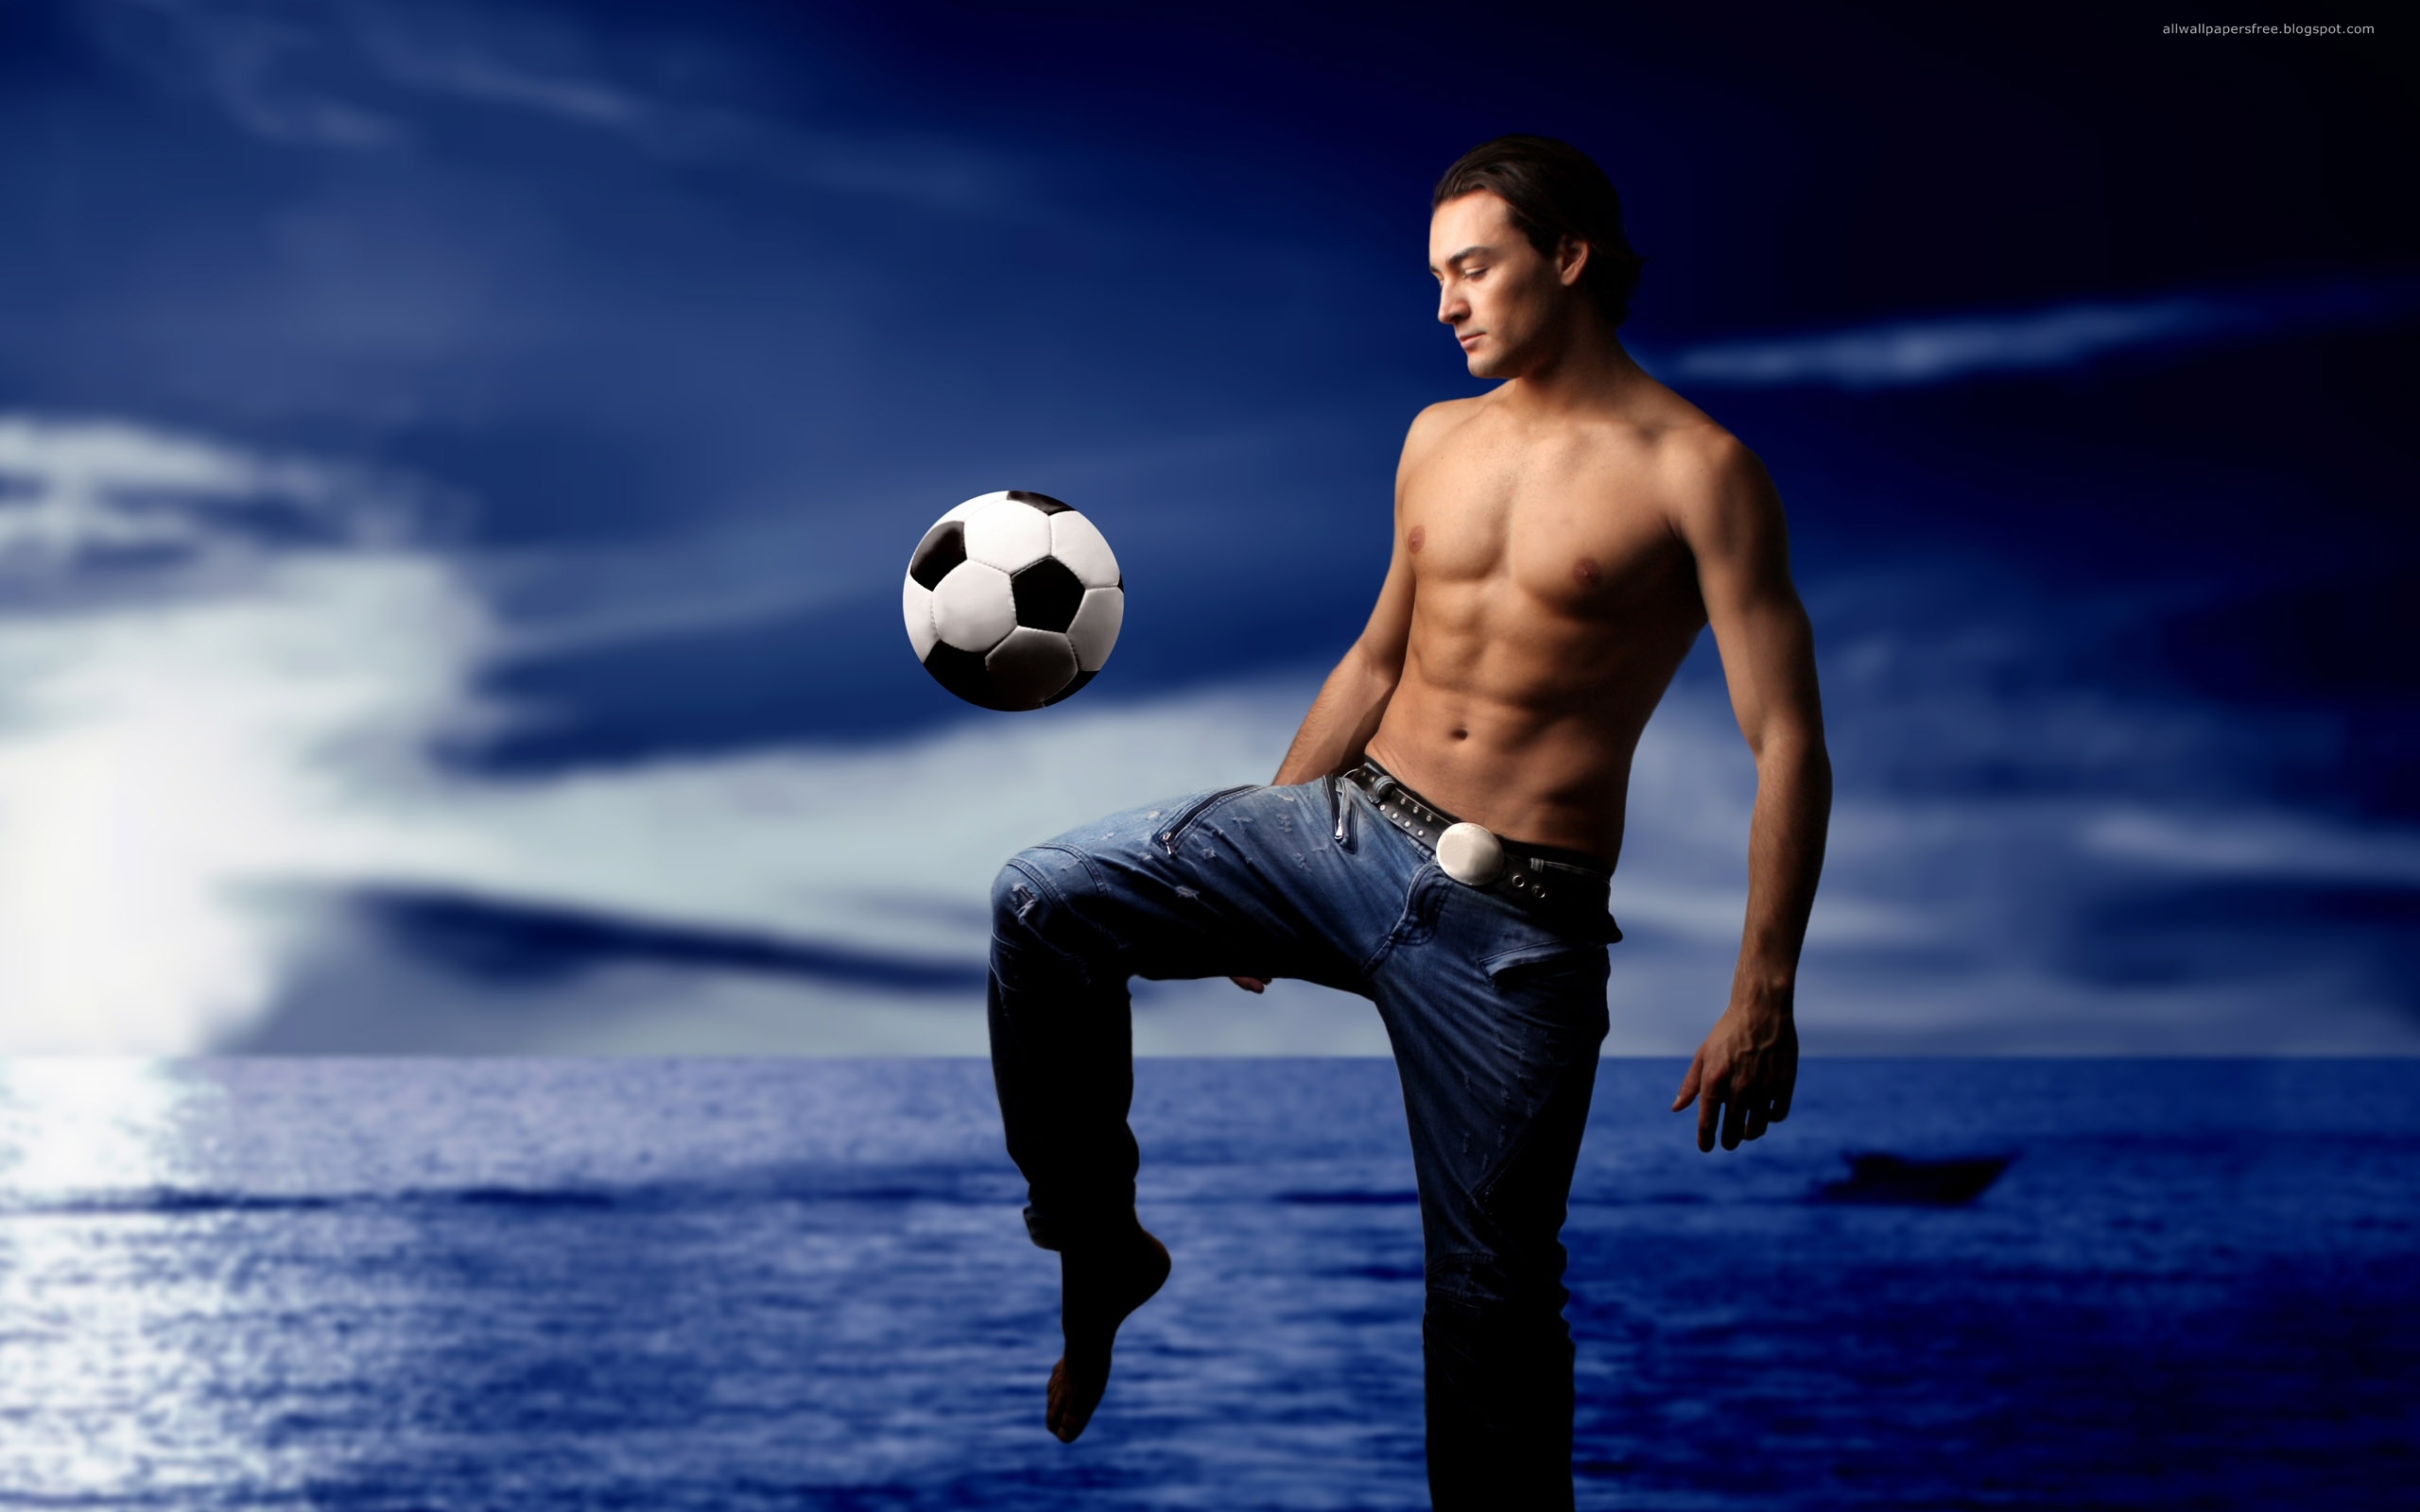 Image Sexy football player wallpapers and stock photos 2560x1600